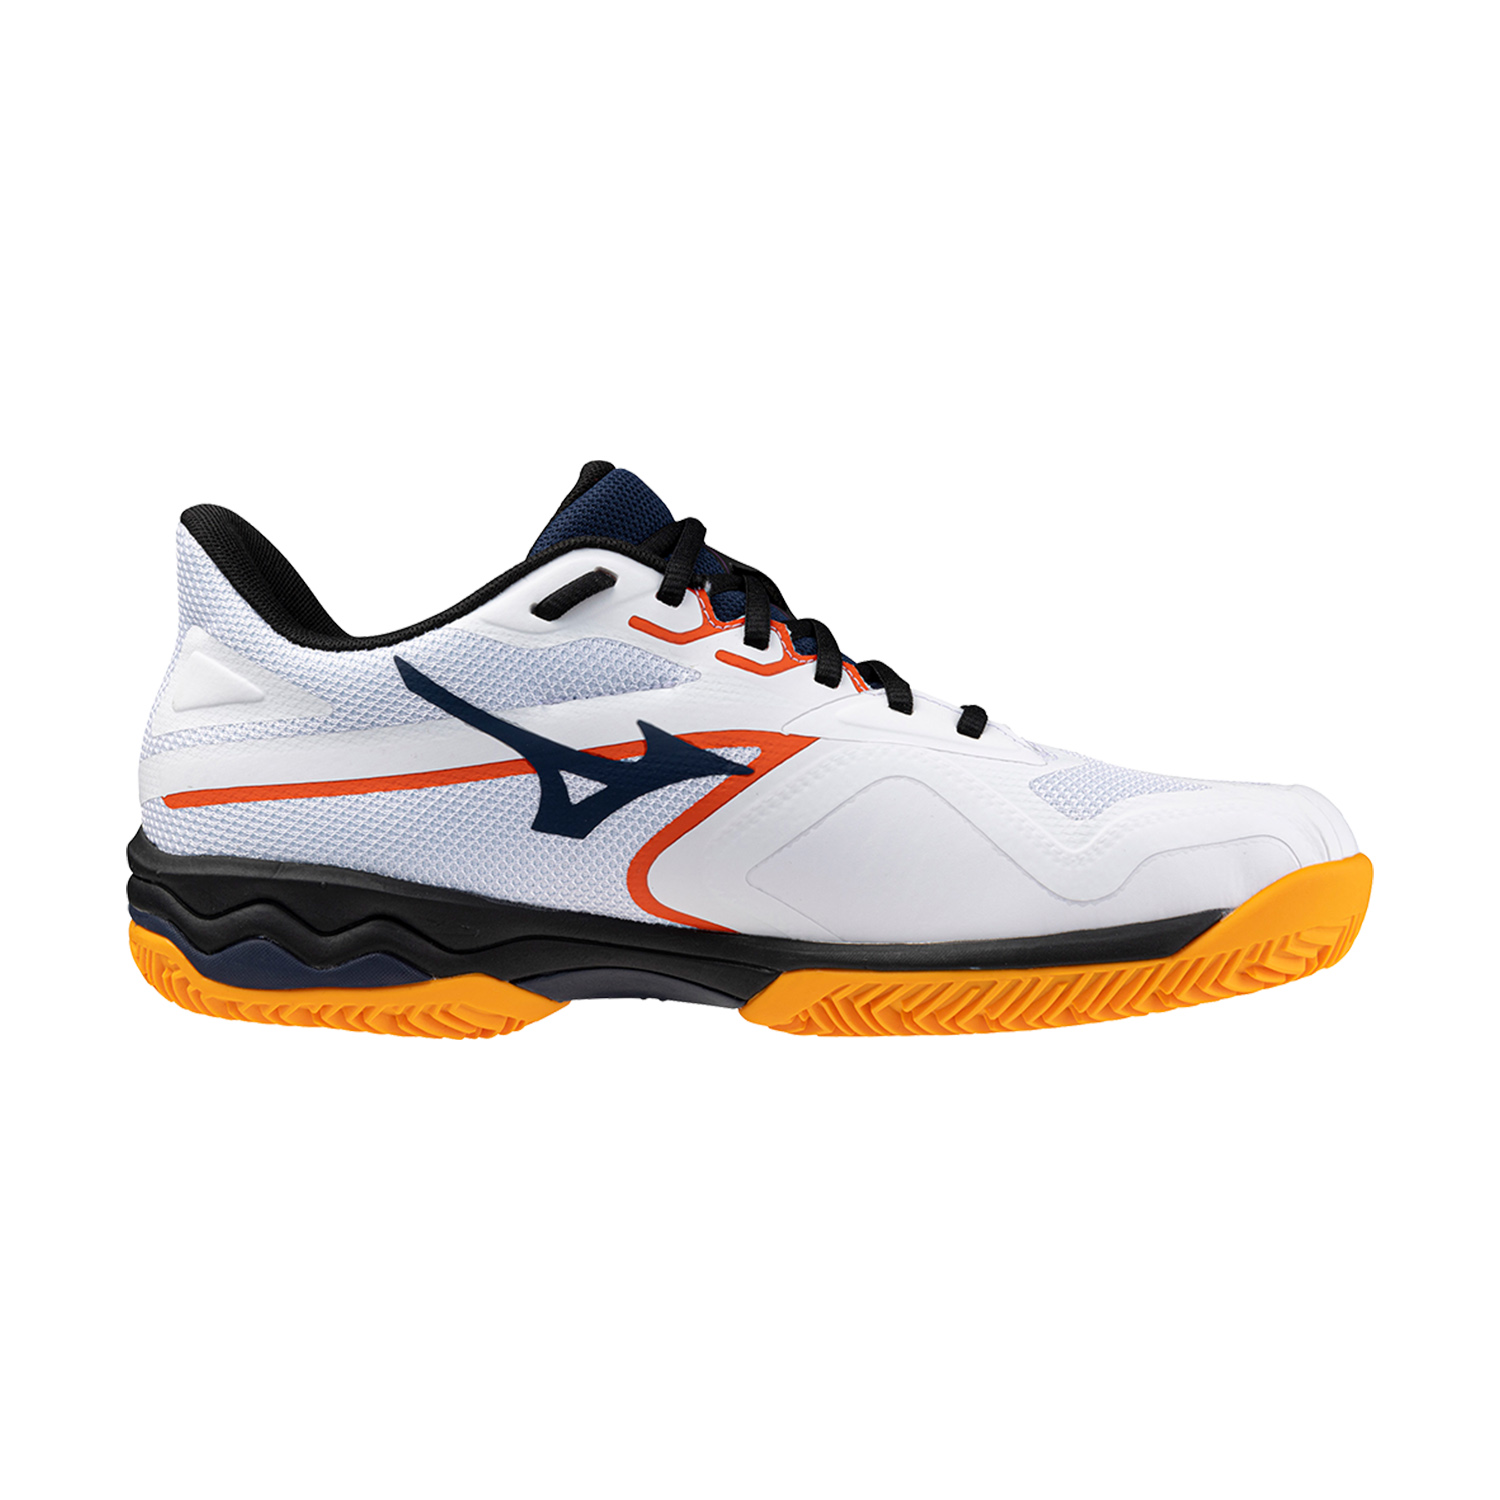 Mizuno Wave Exceed Light 2 Padel - White/Dress Blues/Carrot Curl